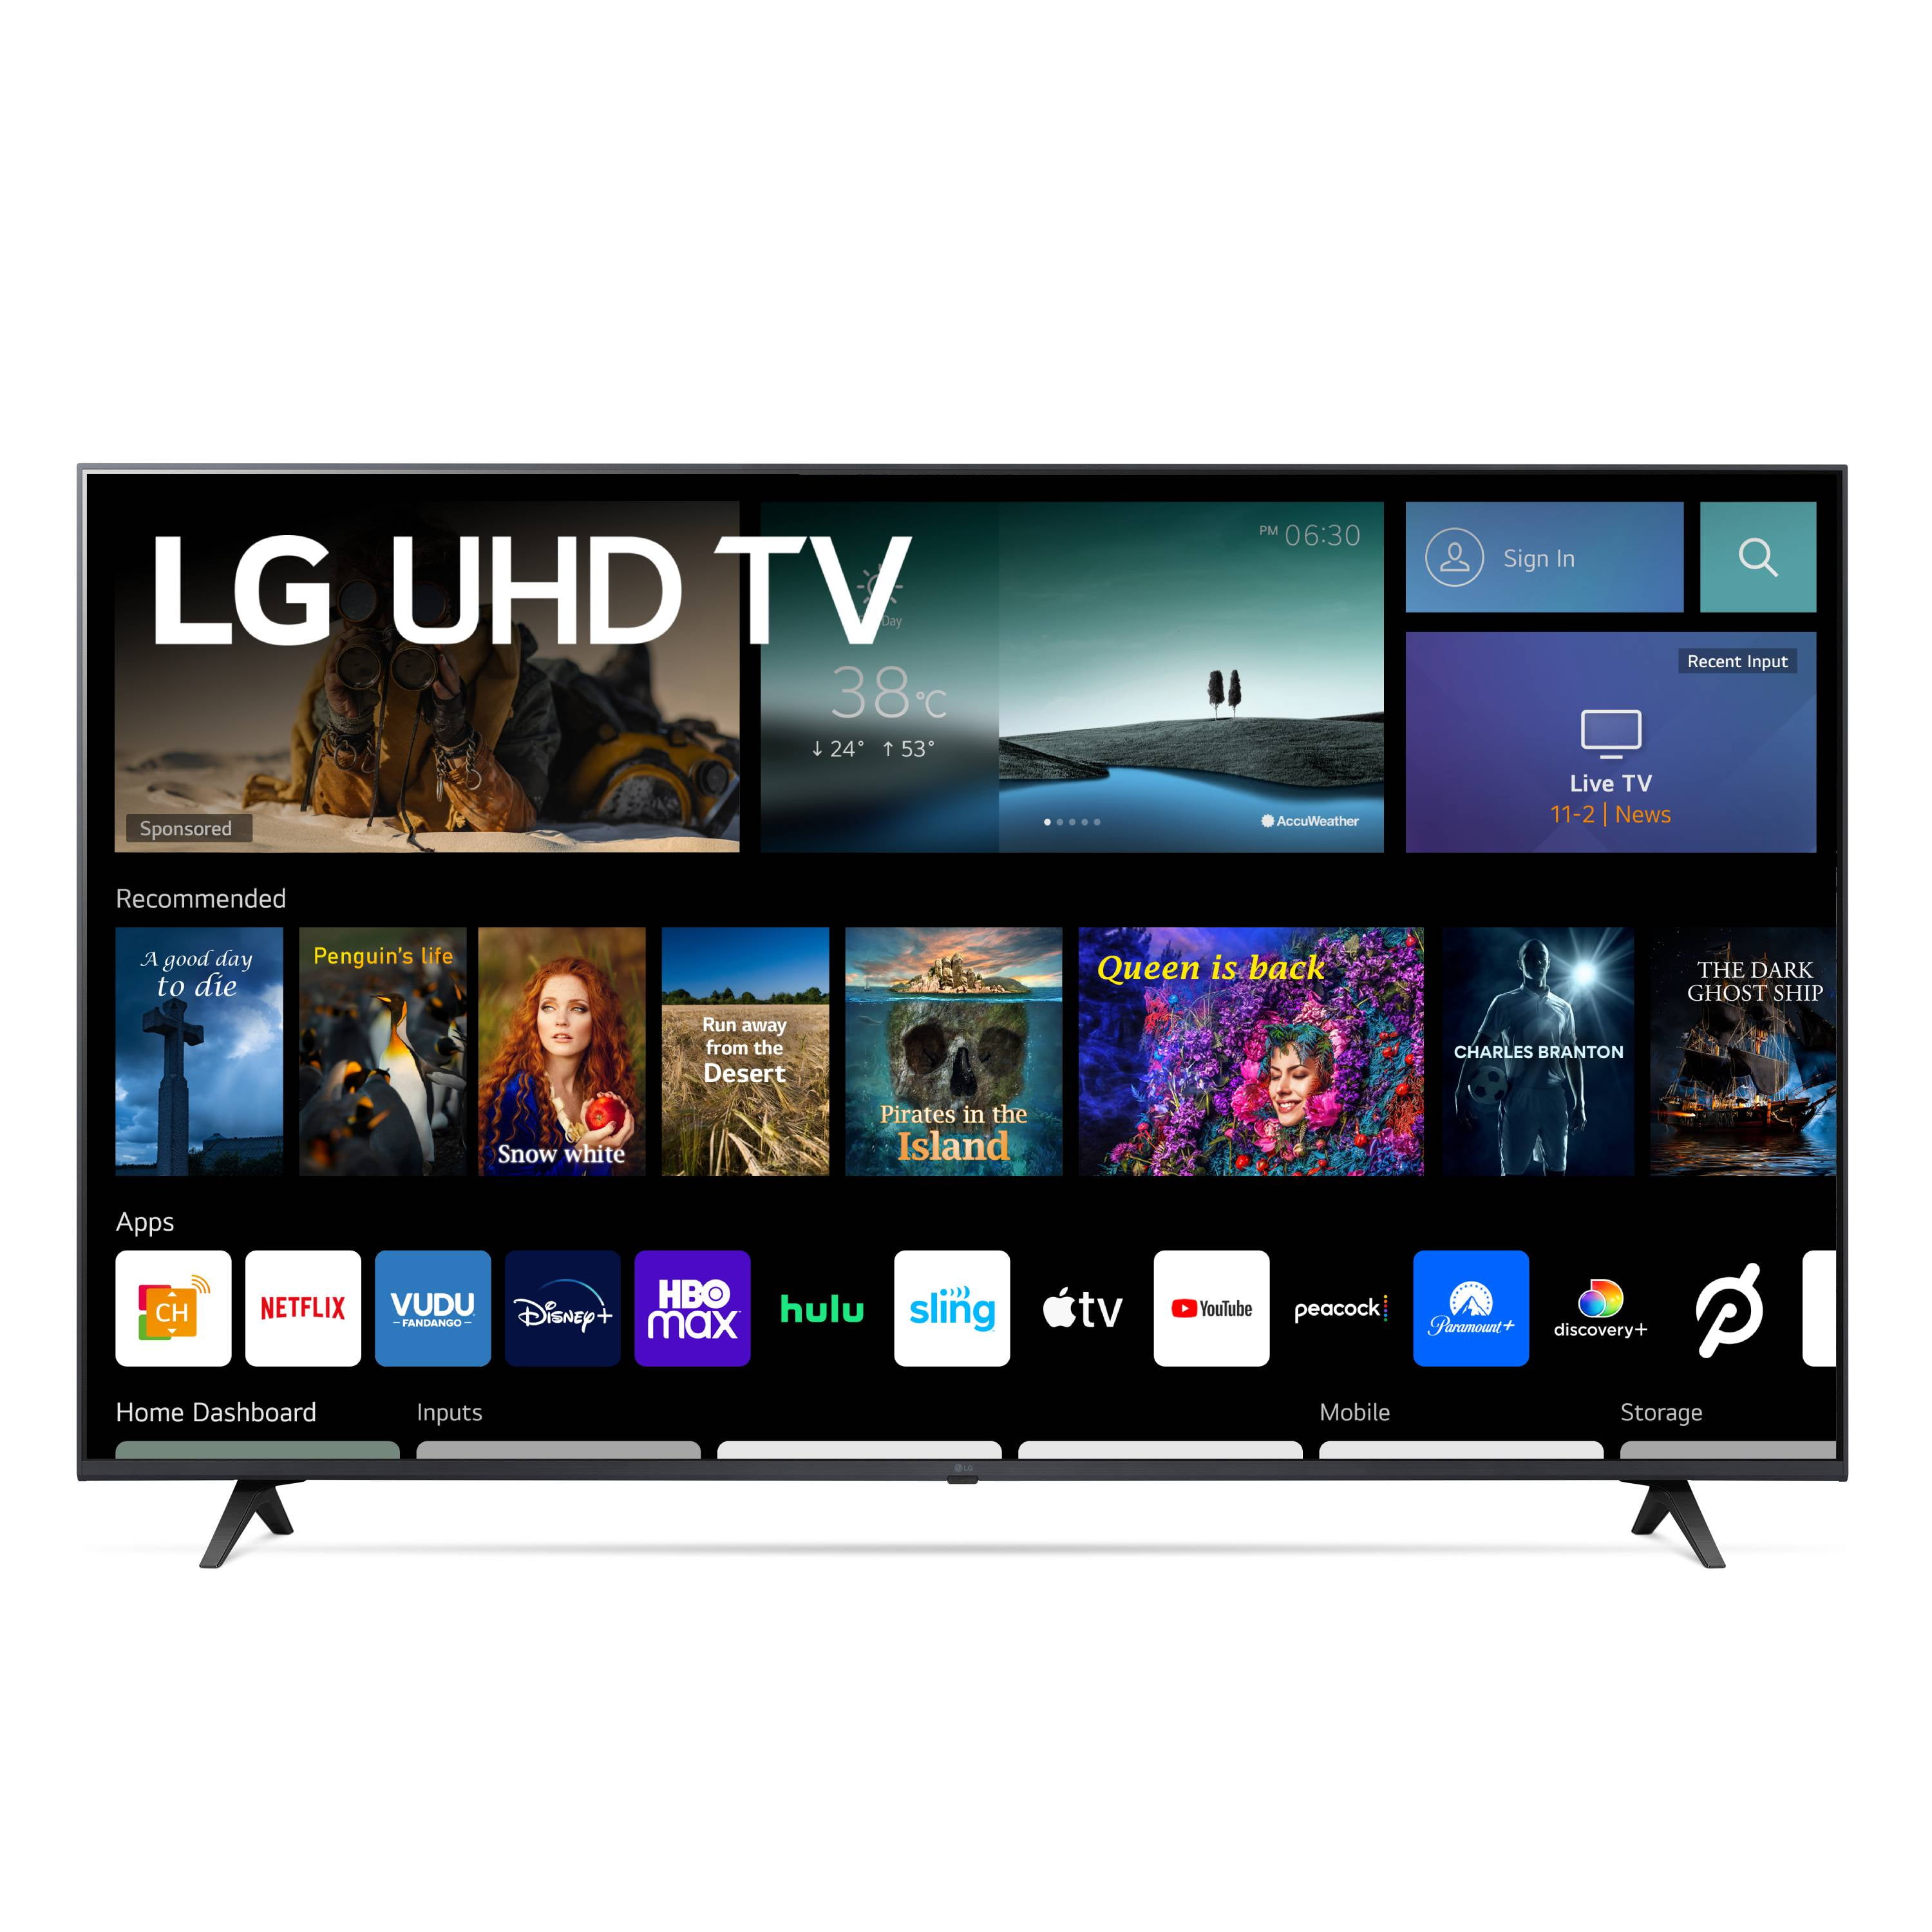 Smart TV TCL A4 Series 50A421 LED Android TV 4K 50 110V